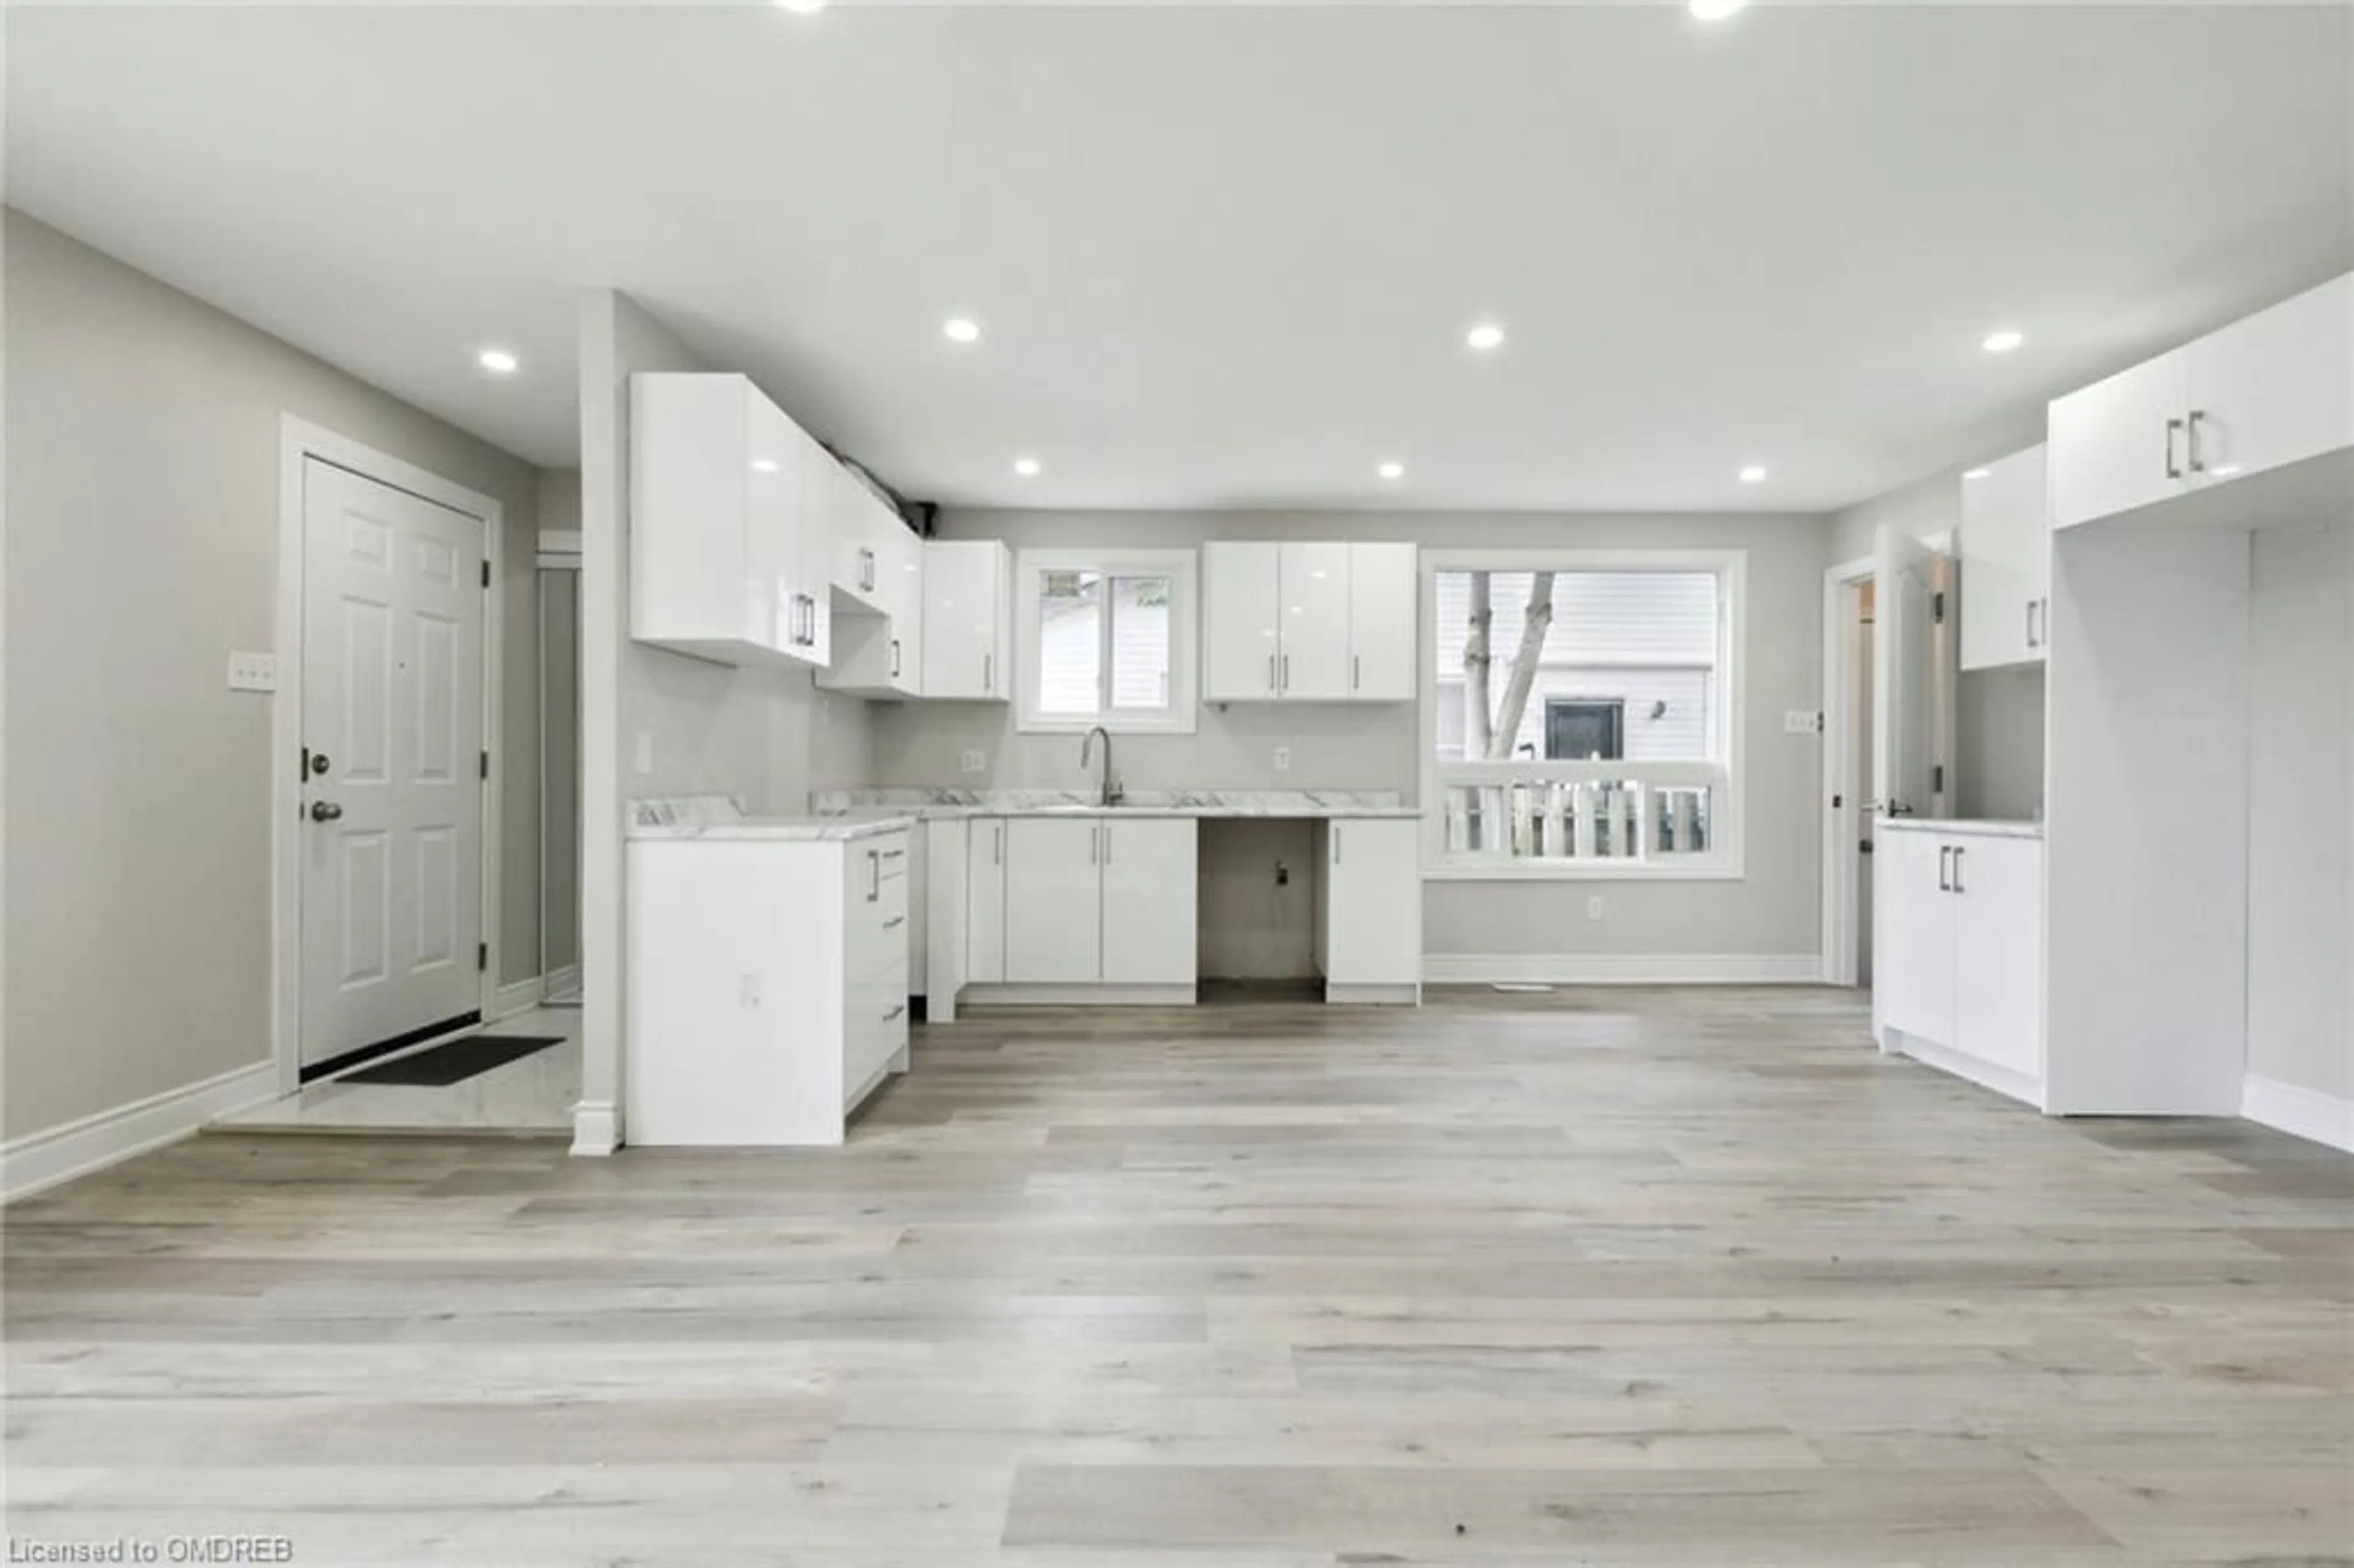 Contemporary kitchen for 19 Sulky Rd, Brantford Ontario N3P 1K1